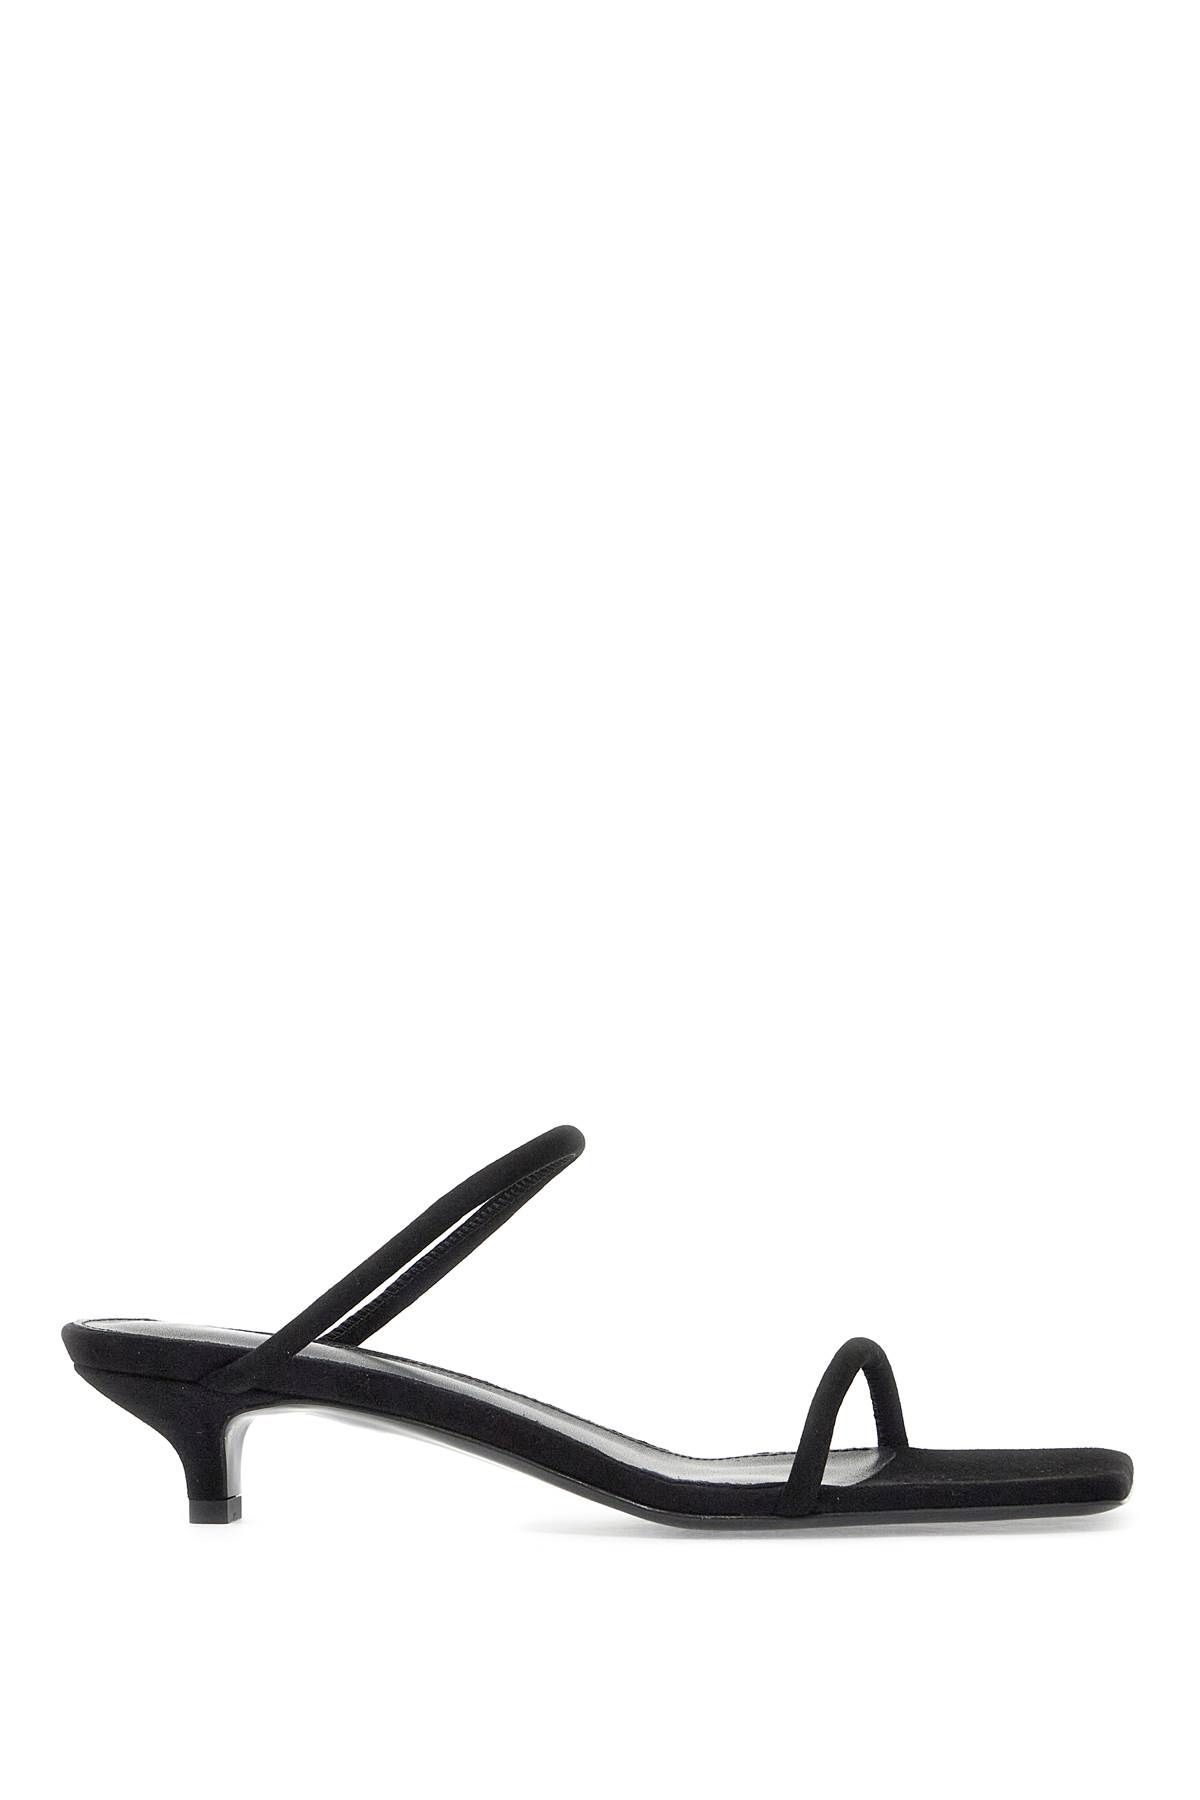 Toteme TOTEME minimalist suede leather sandals